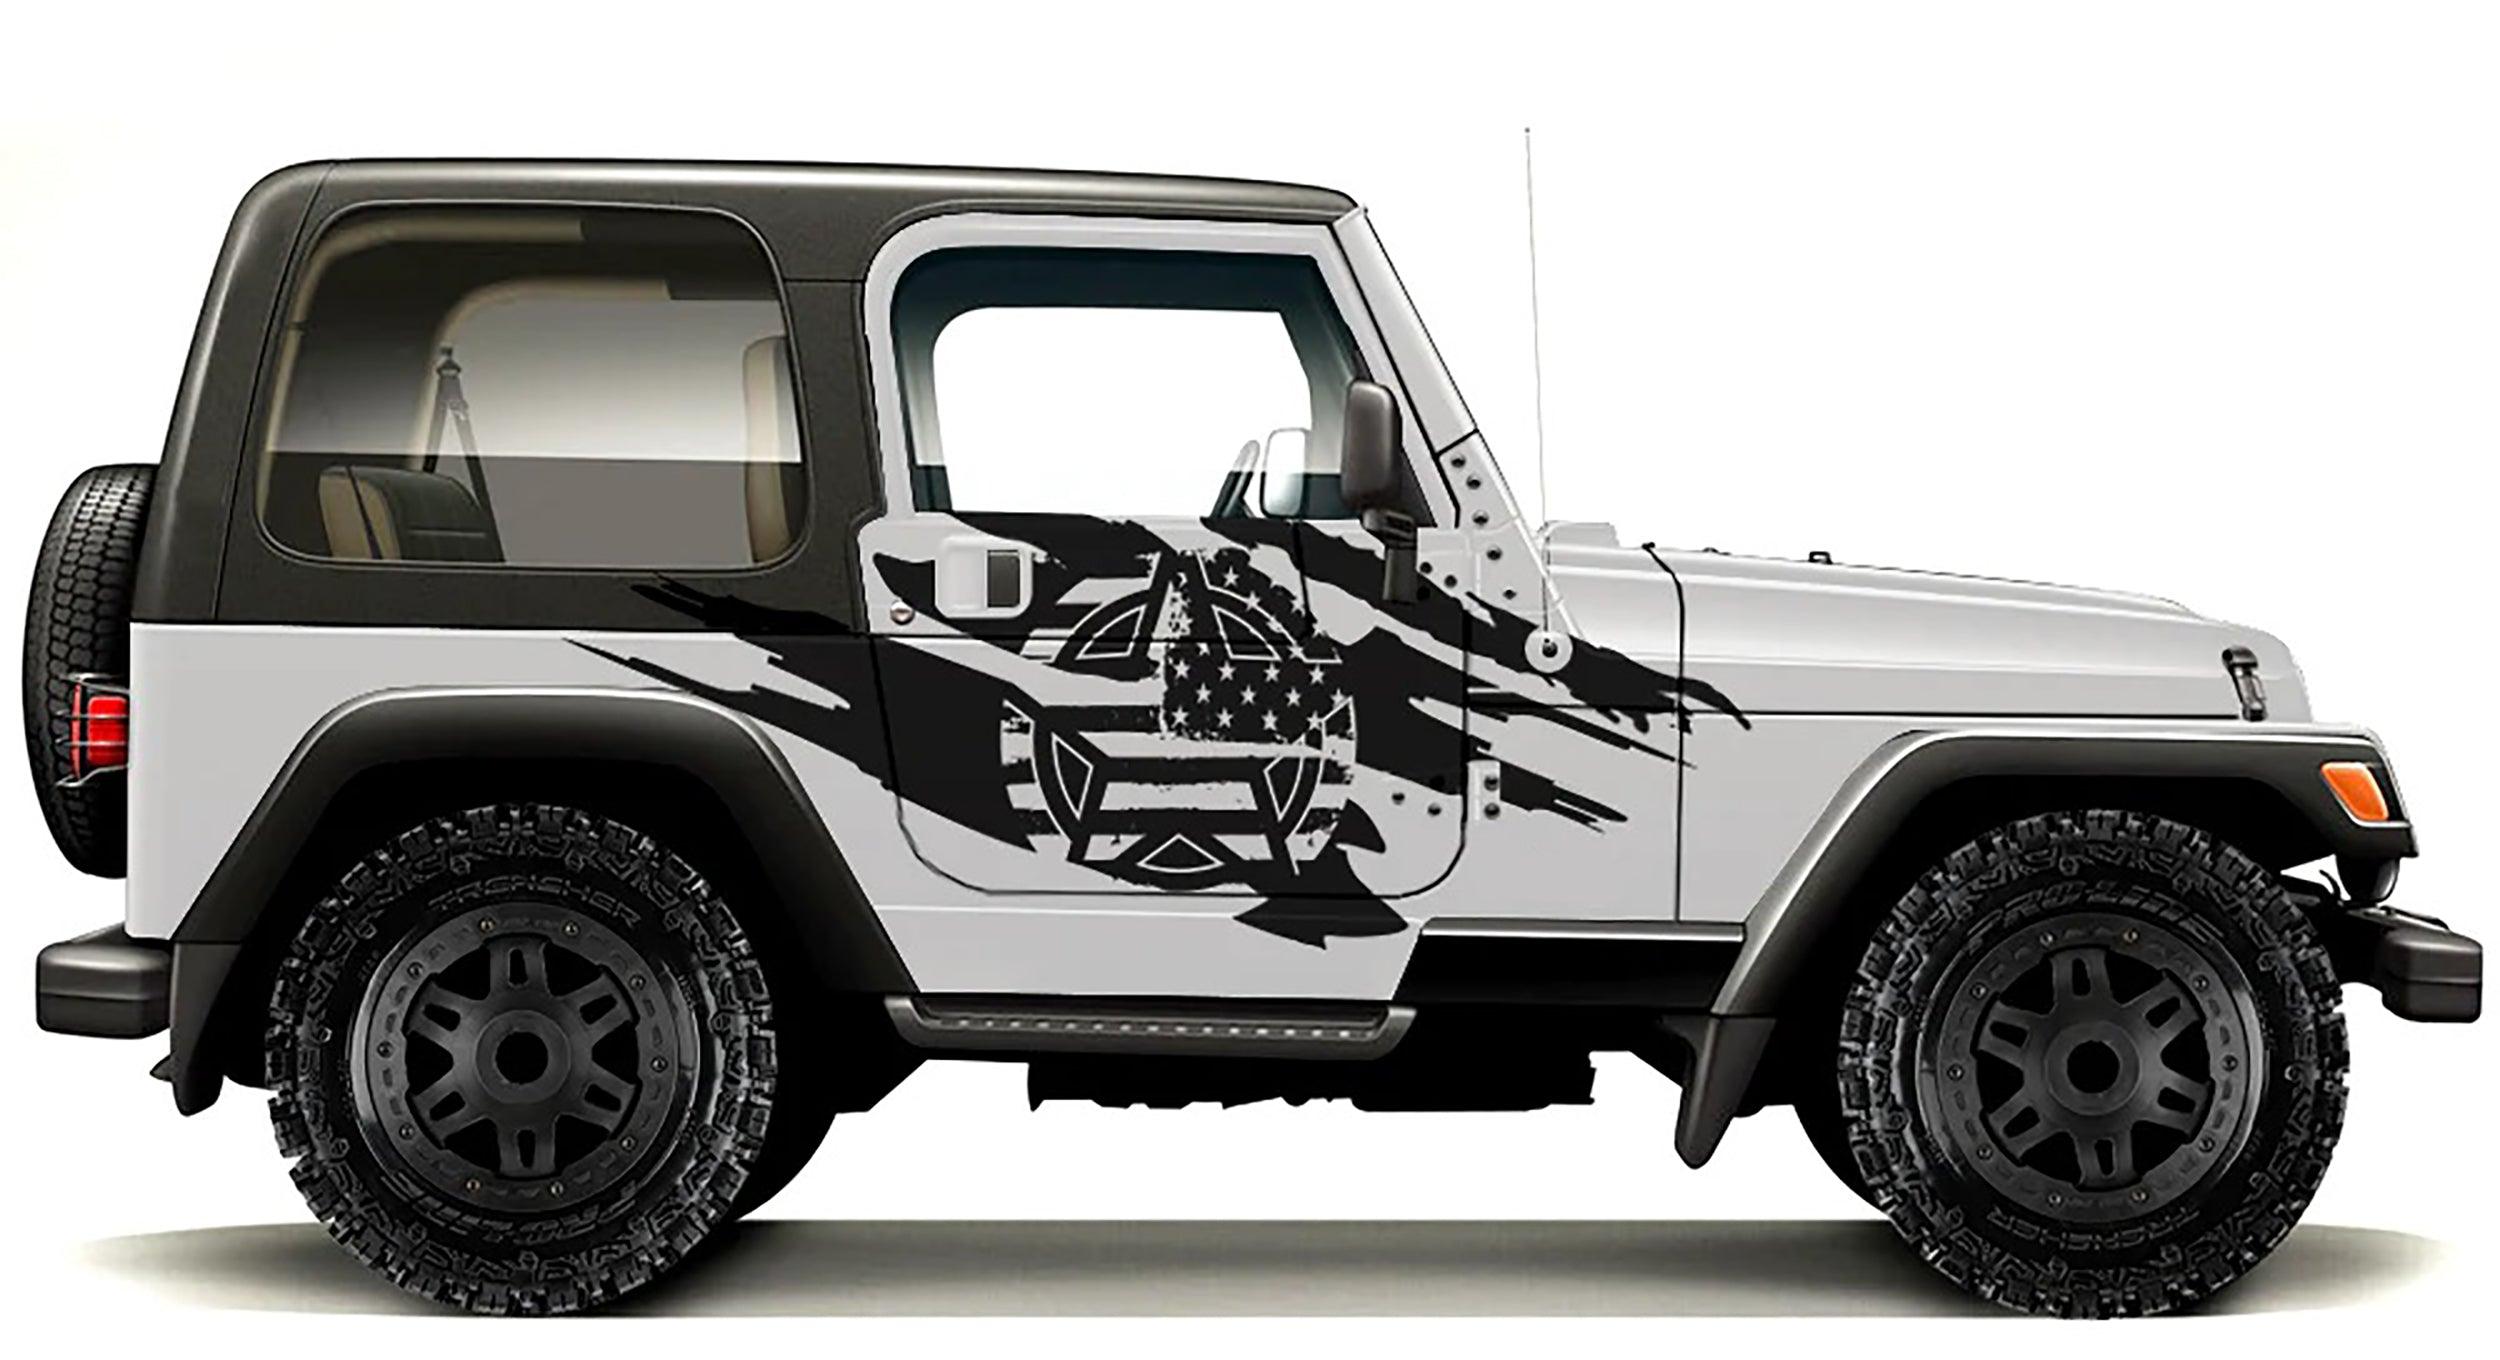 Jeep Wrangler (1999-2006) Custom Decals, Graphics and Stickers - Army Star Torn Kit - Jkprostickers